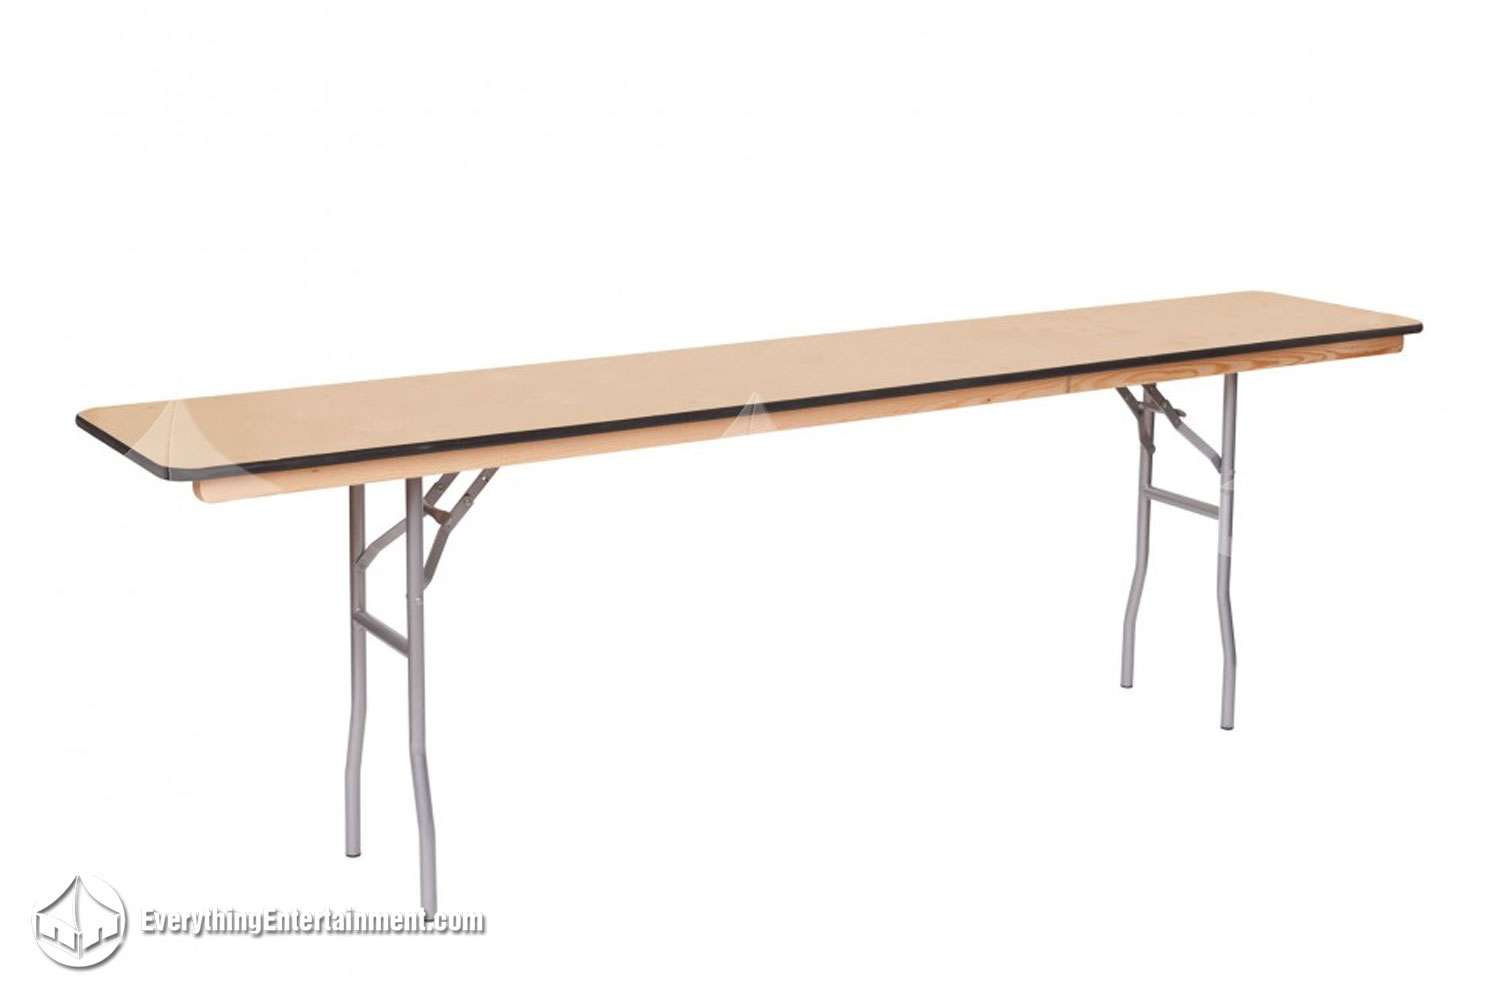 An 8 foot seminar table on white background